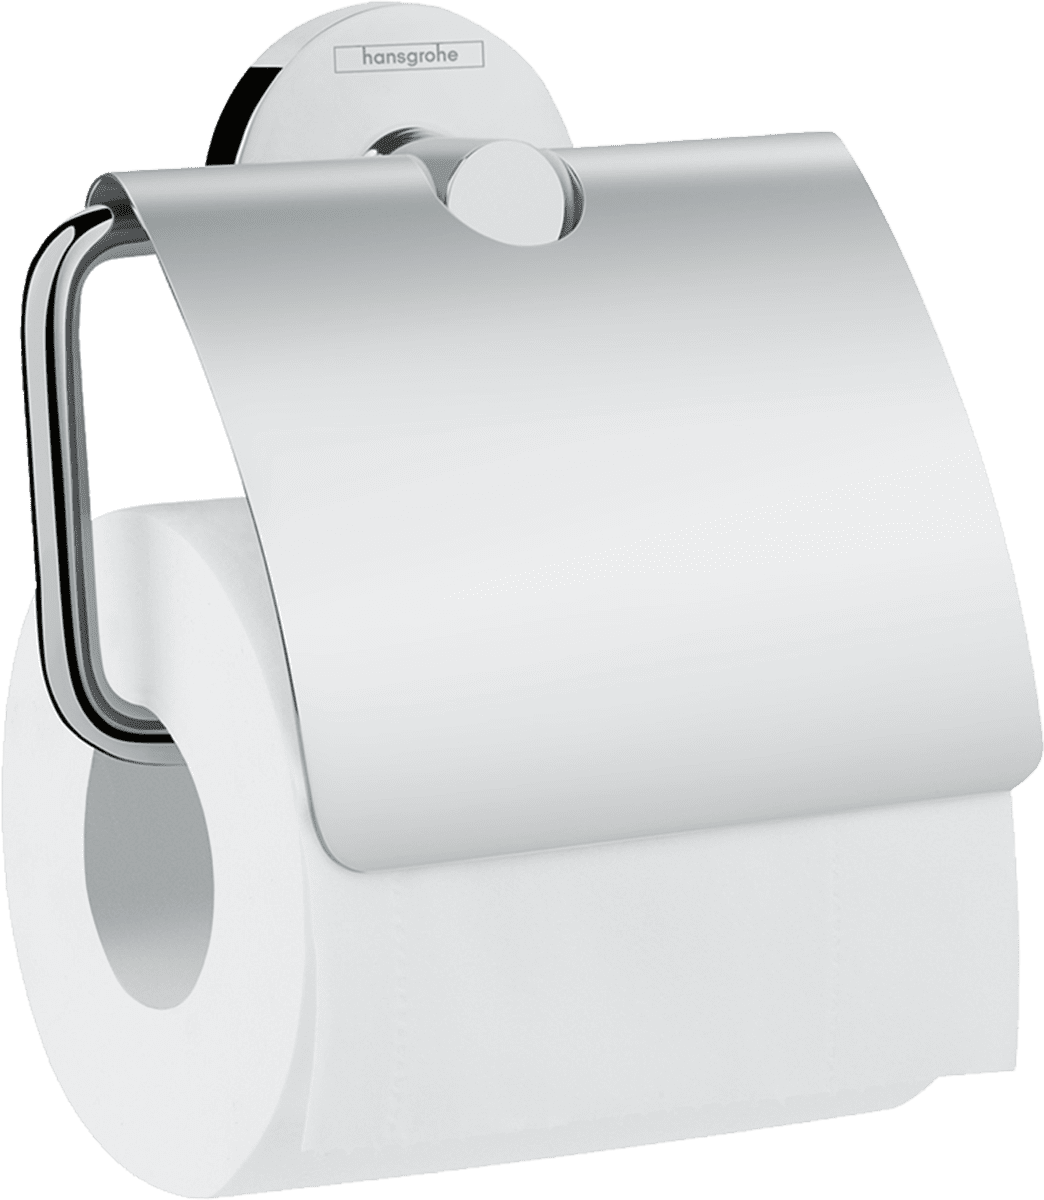 Picture of HANSGROHE Logis Universal Toilet paper holder with cover #41723000 - Chrome